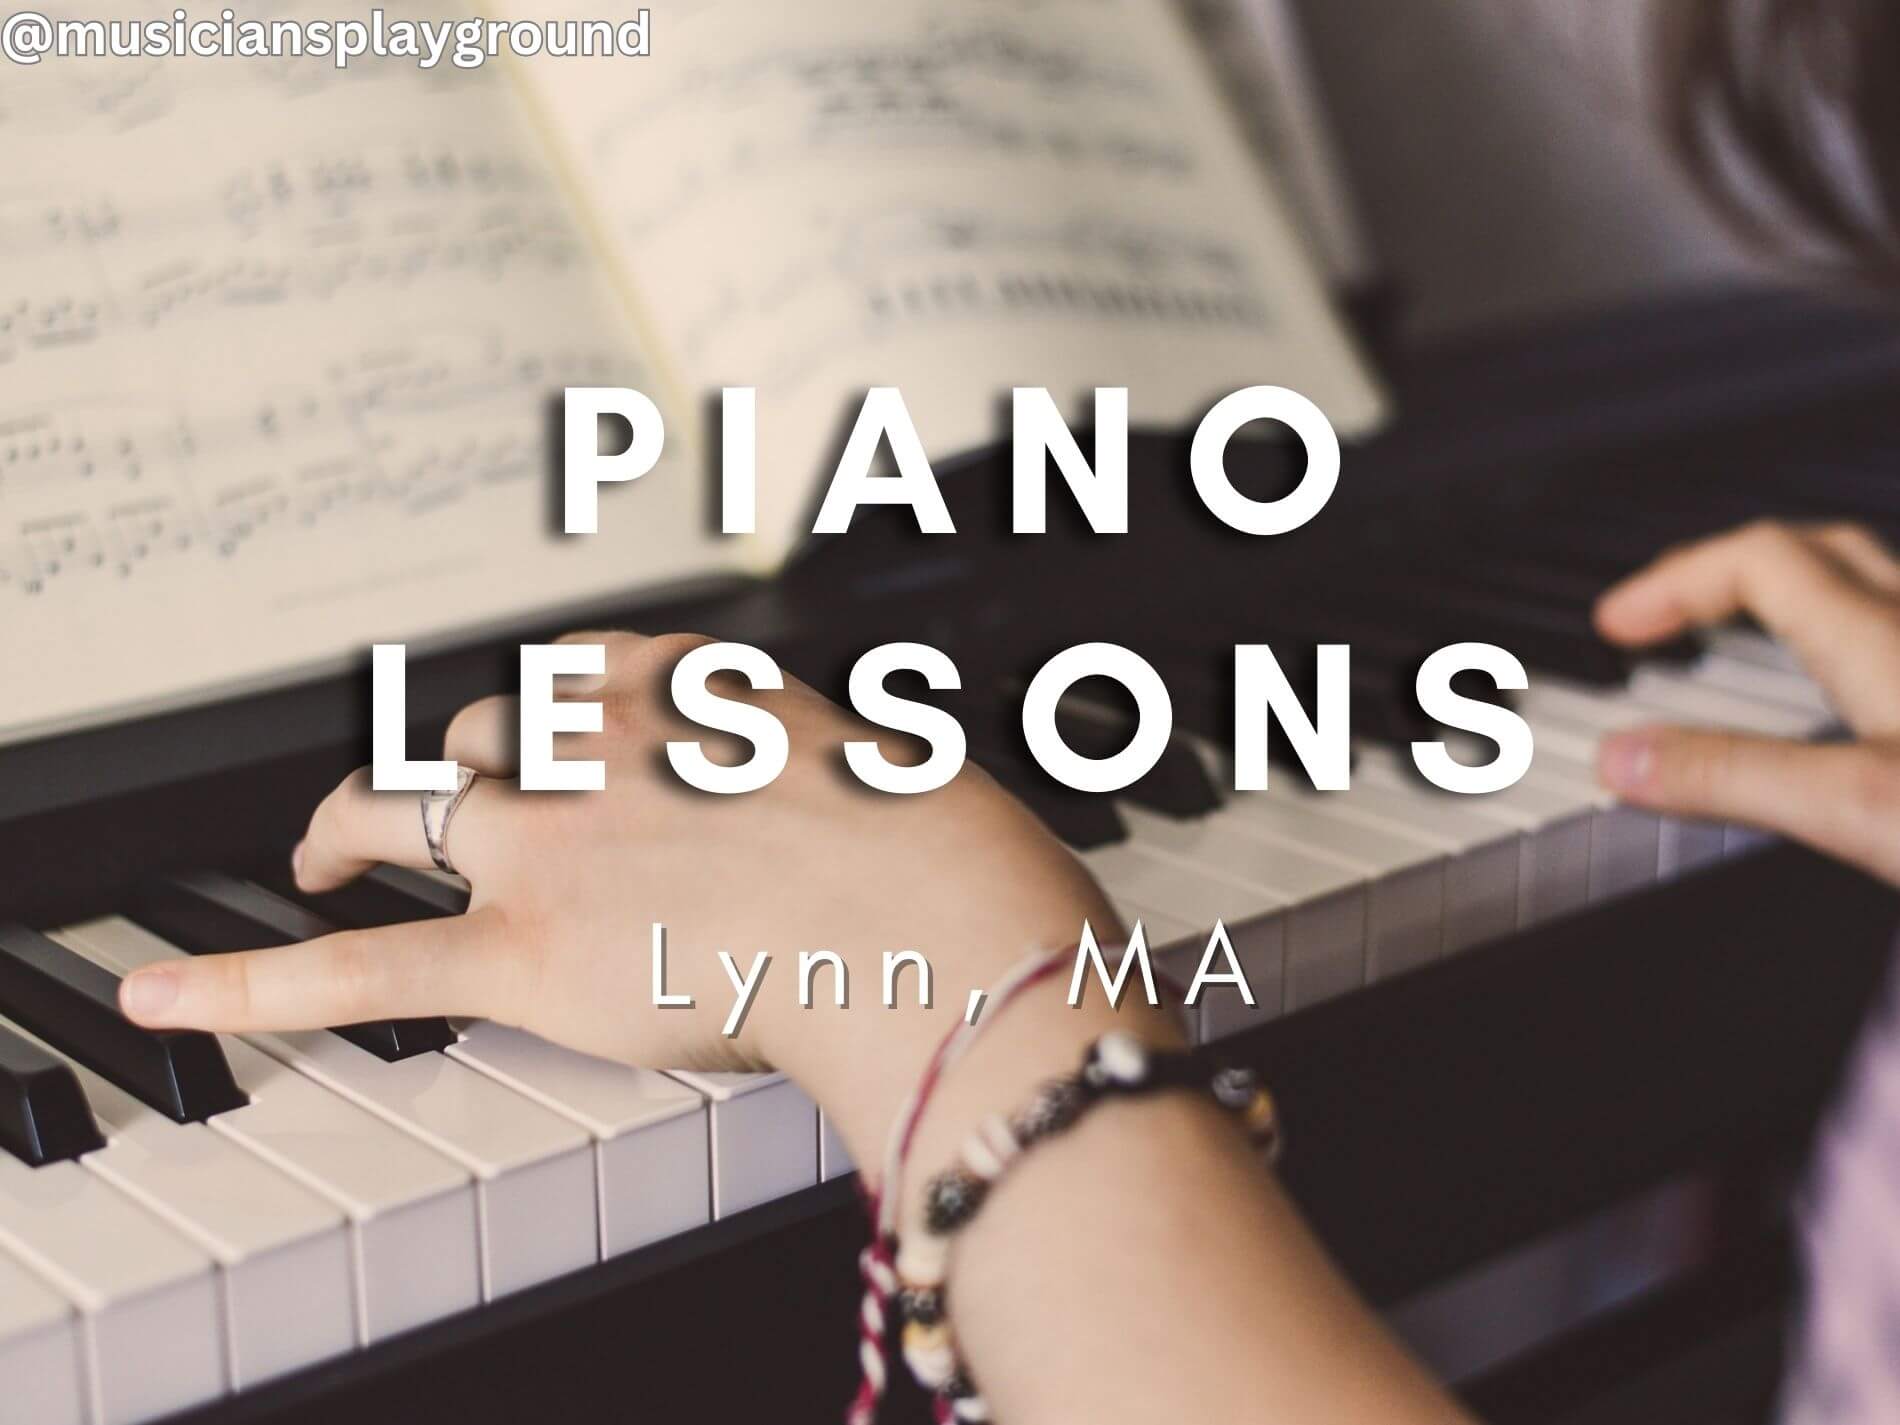 Piano Lessons in Lynn, Massachusetts: Enhancing Music Education through Practice Lessons, Technique, Repertoire, and Practice Tips